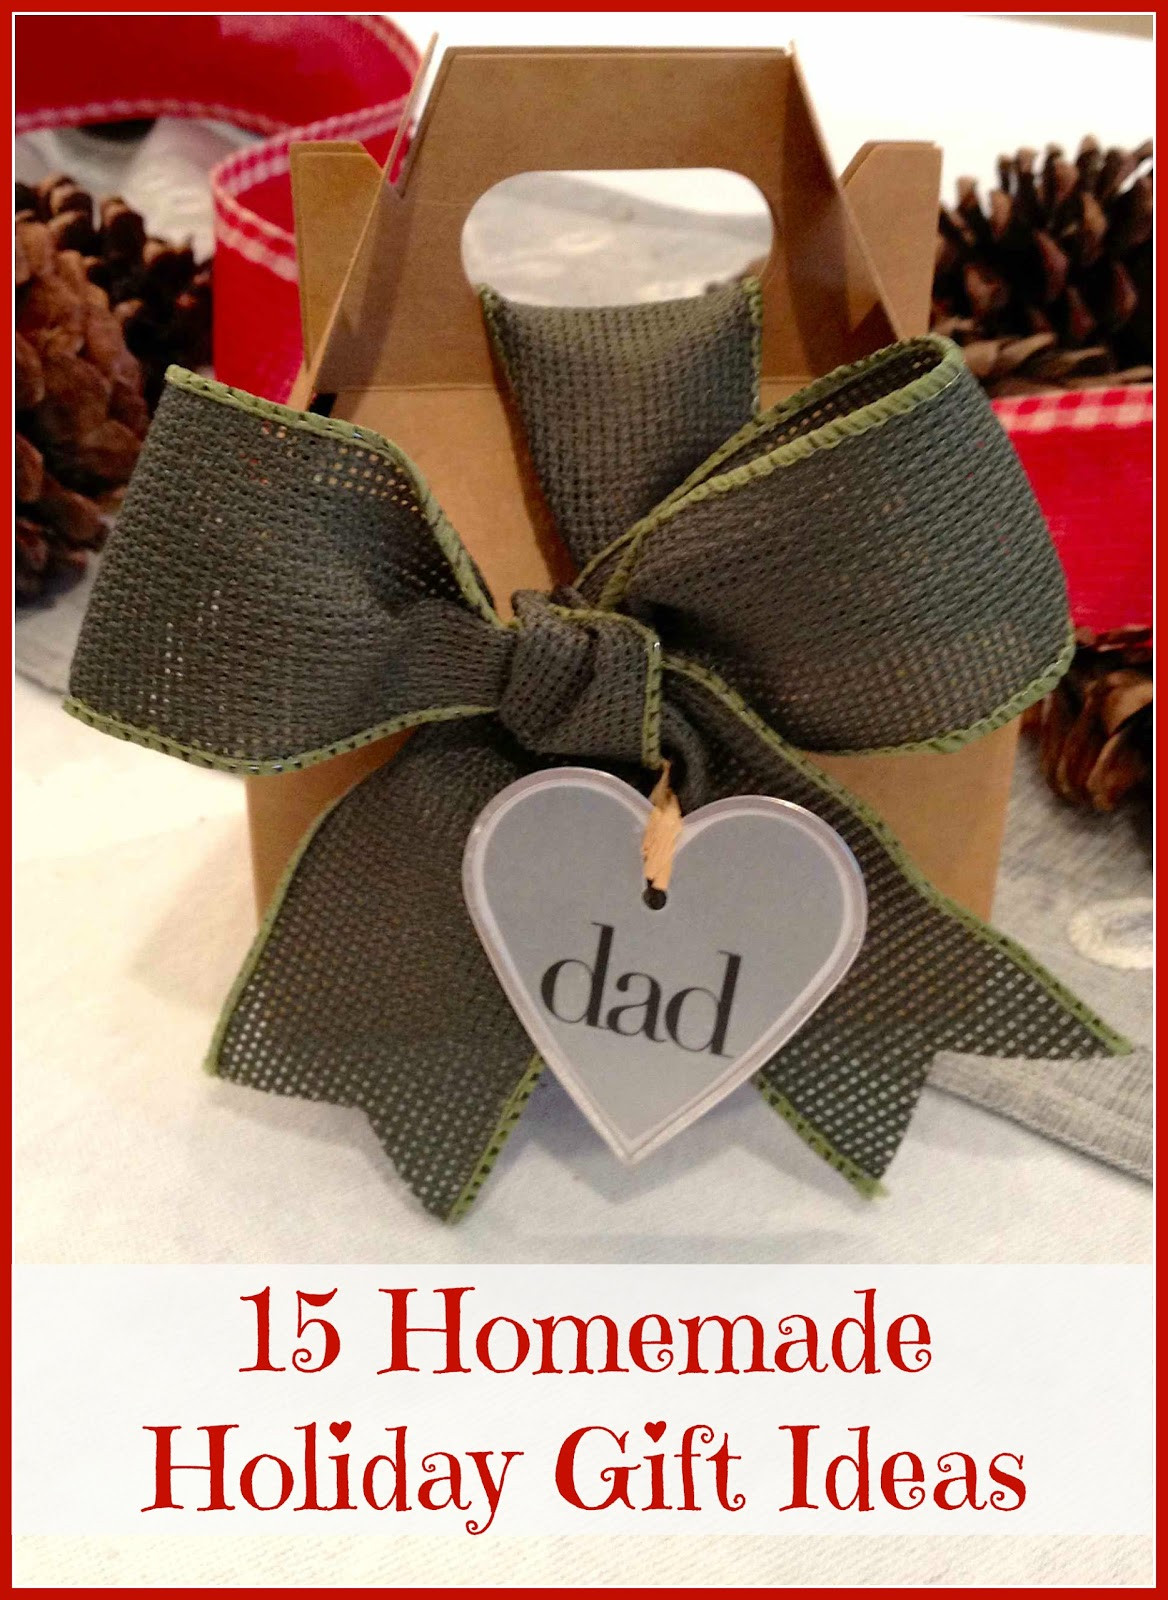 Homemade Holiday Gift Ideas
 Homemade Christmas Gifts Ideas You ll Love